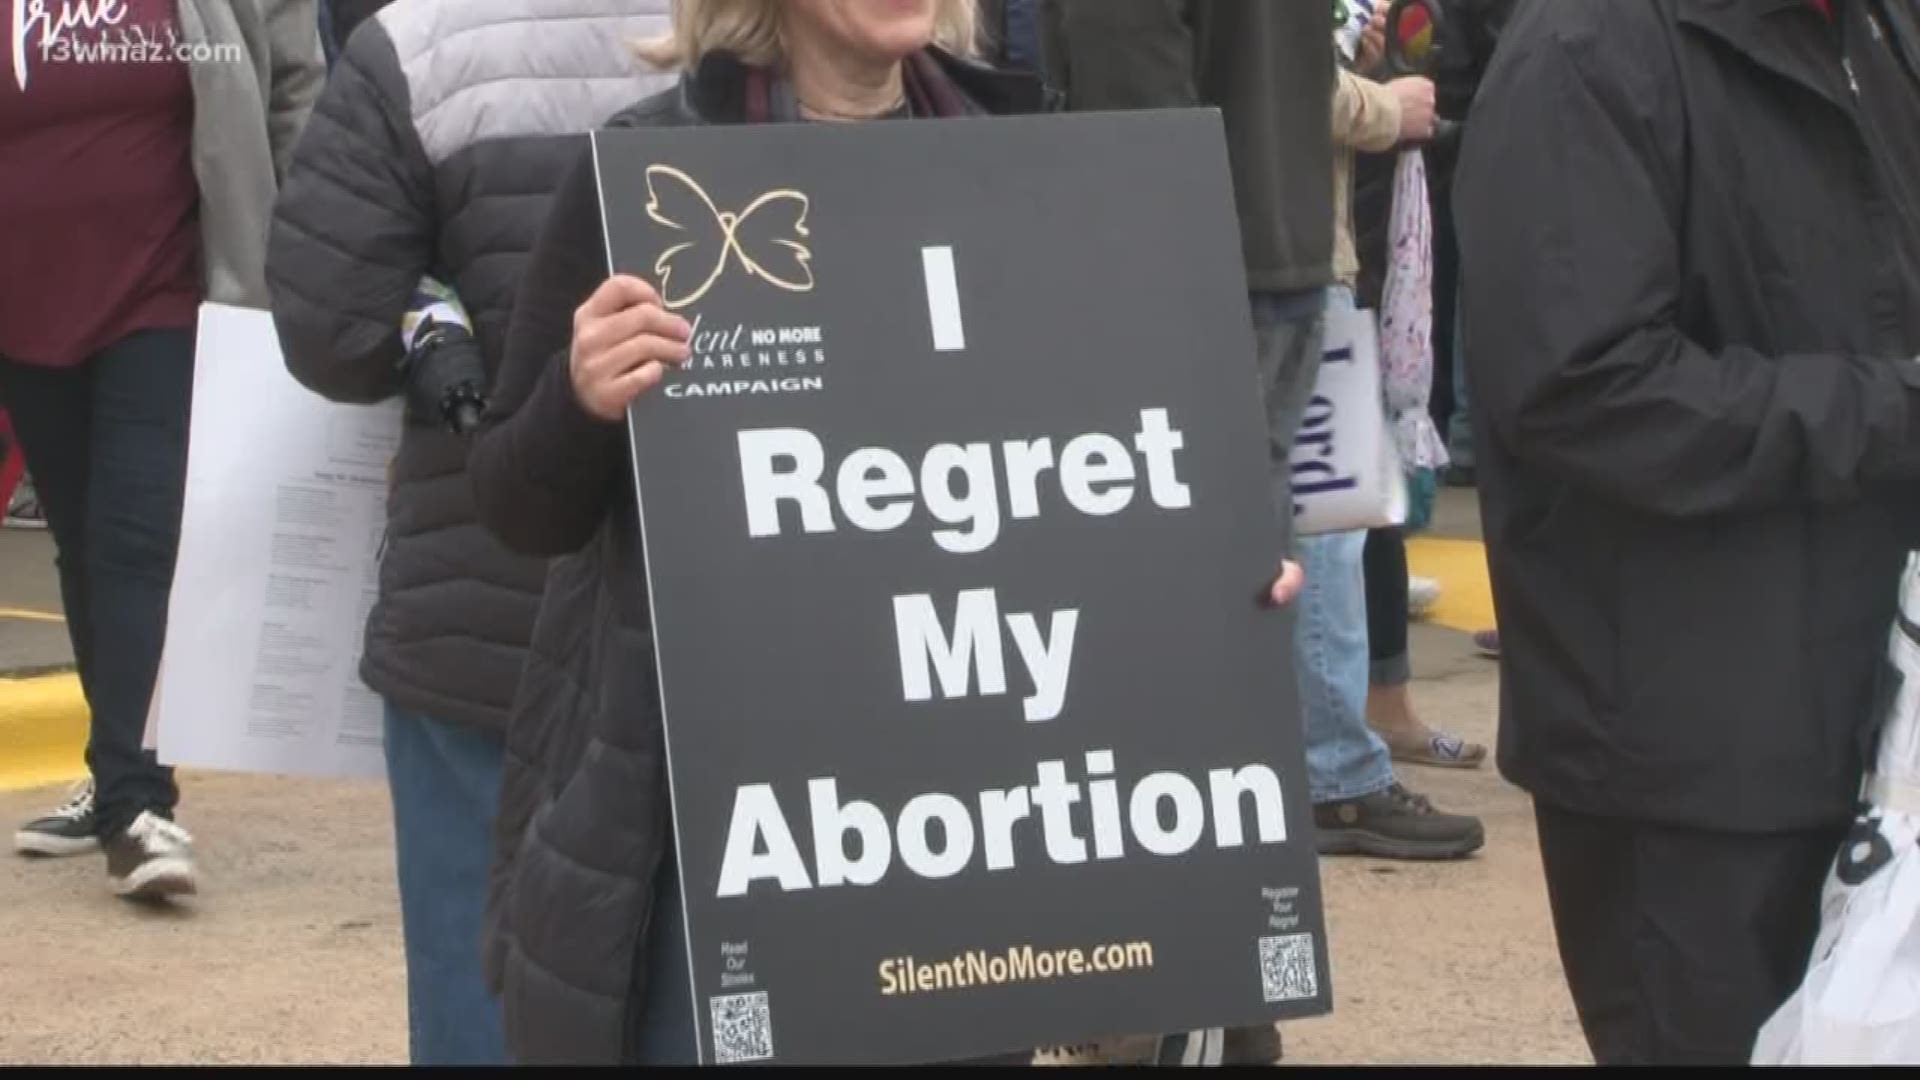 For the 5th year, the March for Life was sponsored by Macon's Kolbe Center, an anti-abortion organization.